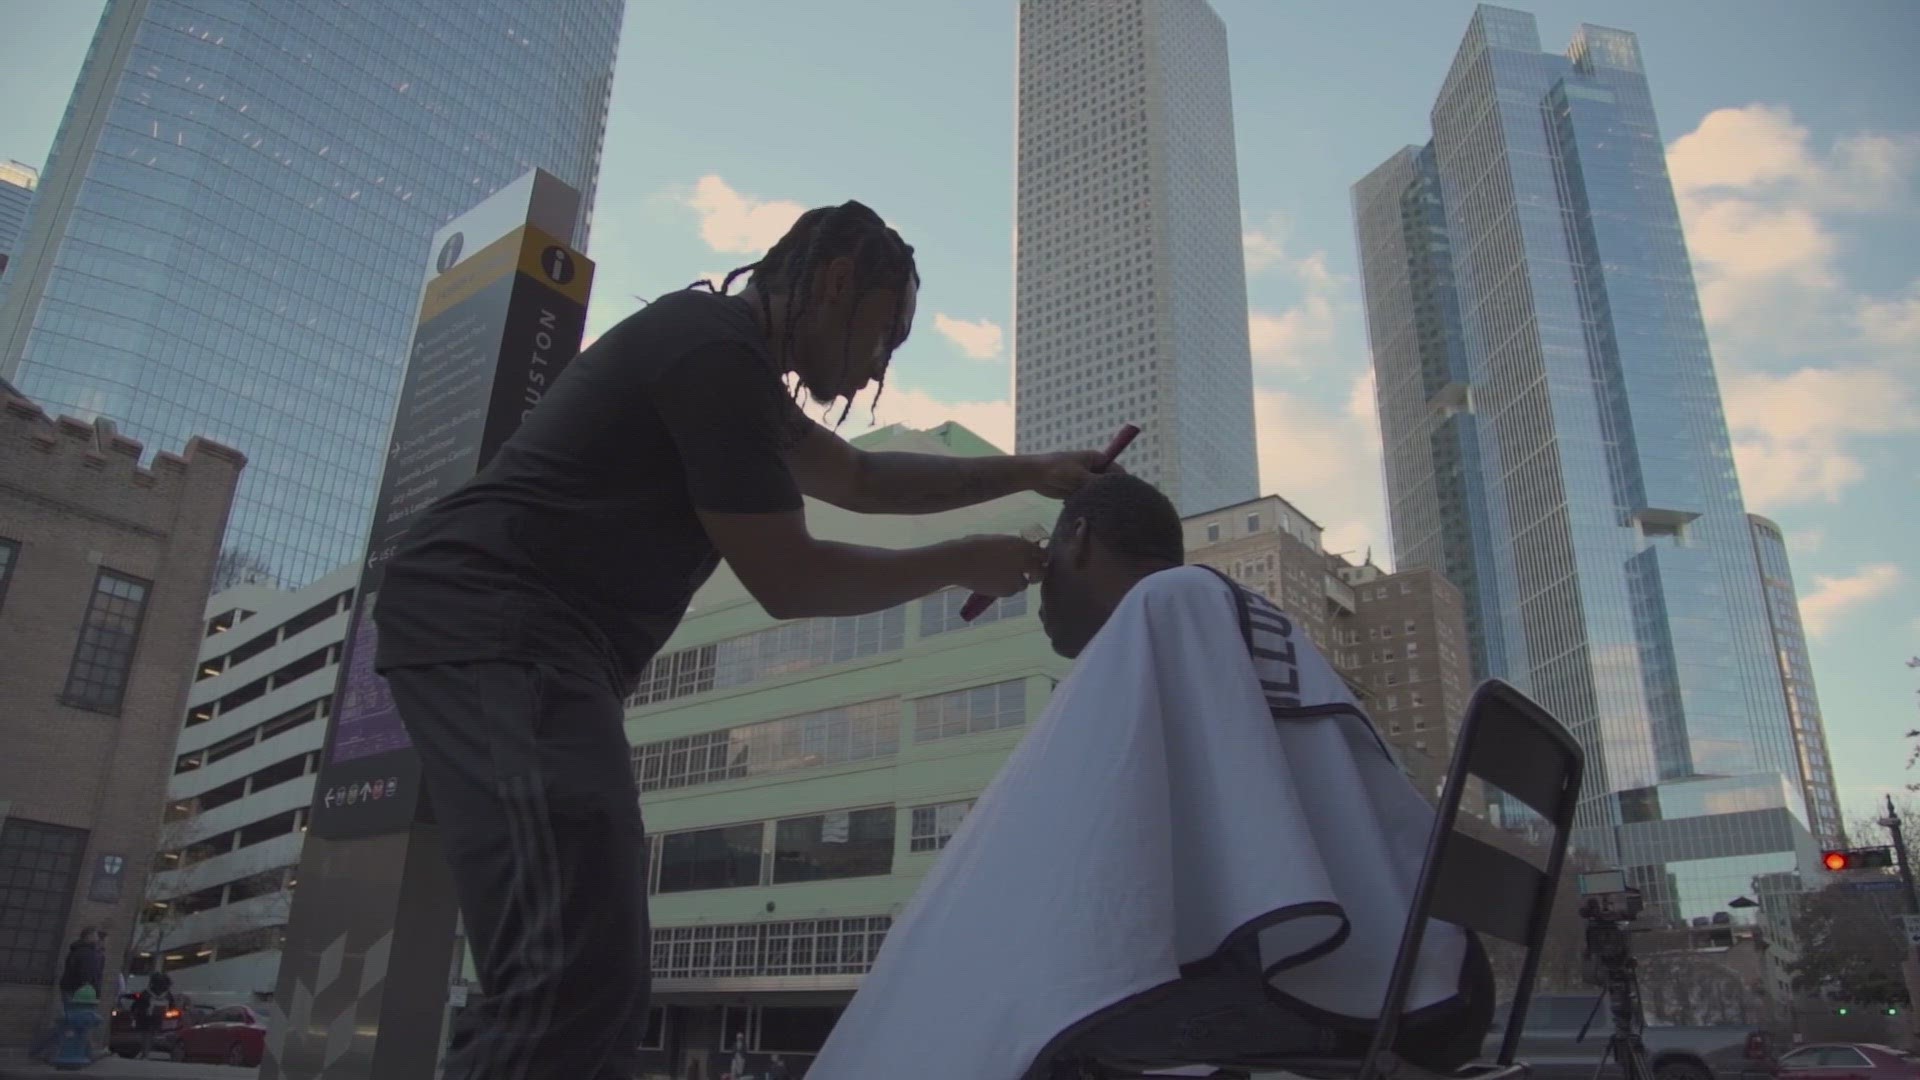 Every week, Christian Khammany goes downtown and cuts the hair of those in need -- those without a home -- for hours until his clippers die.